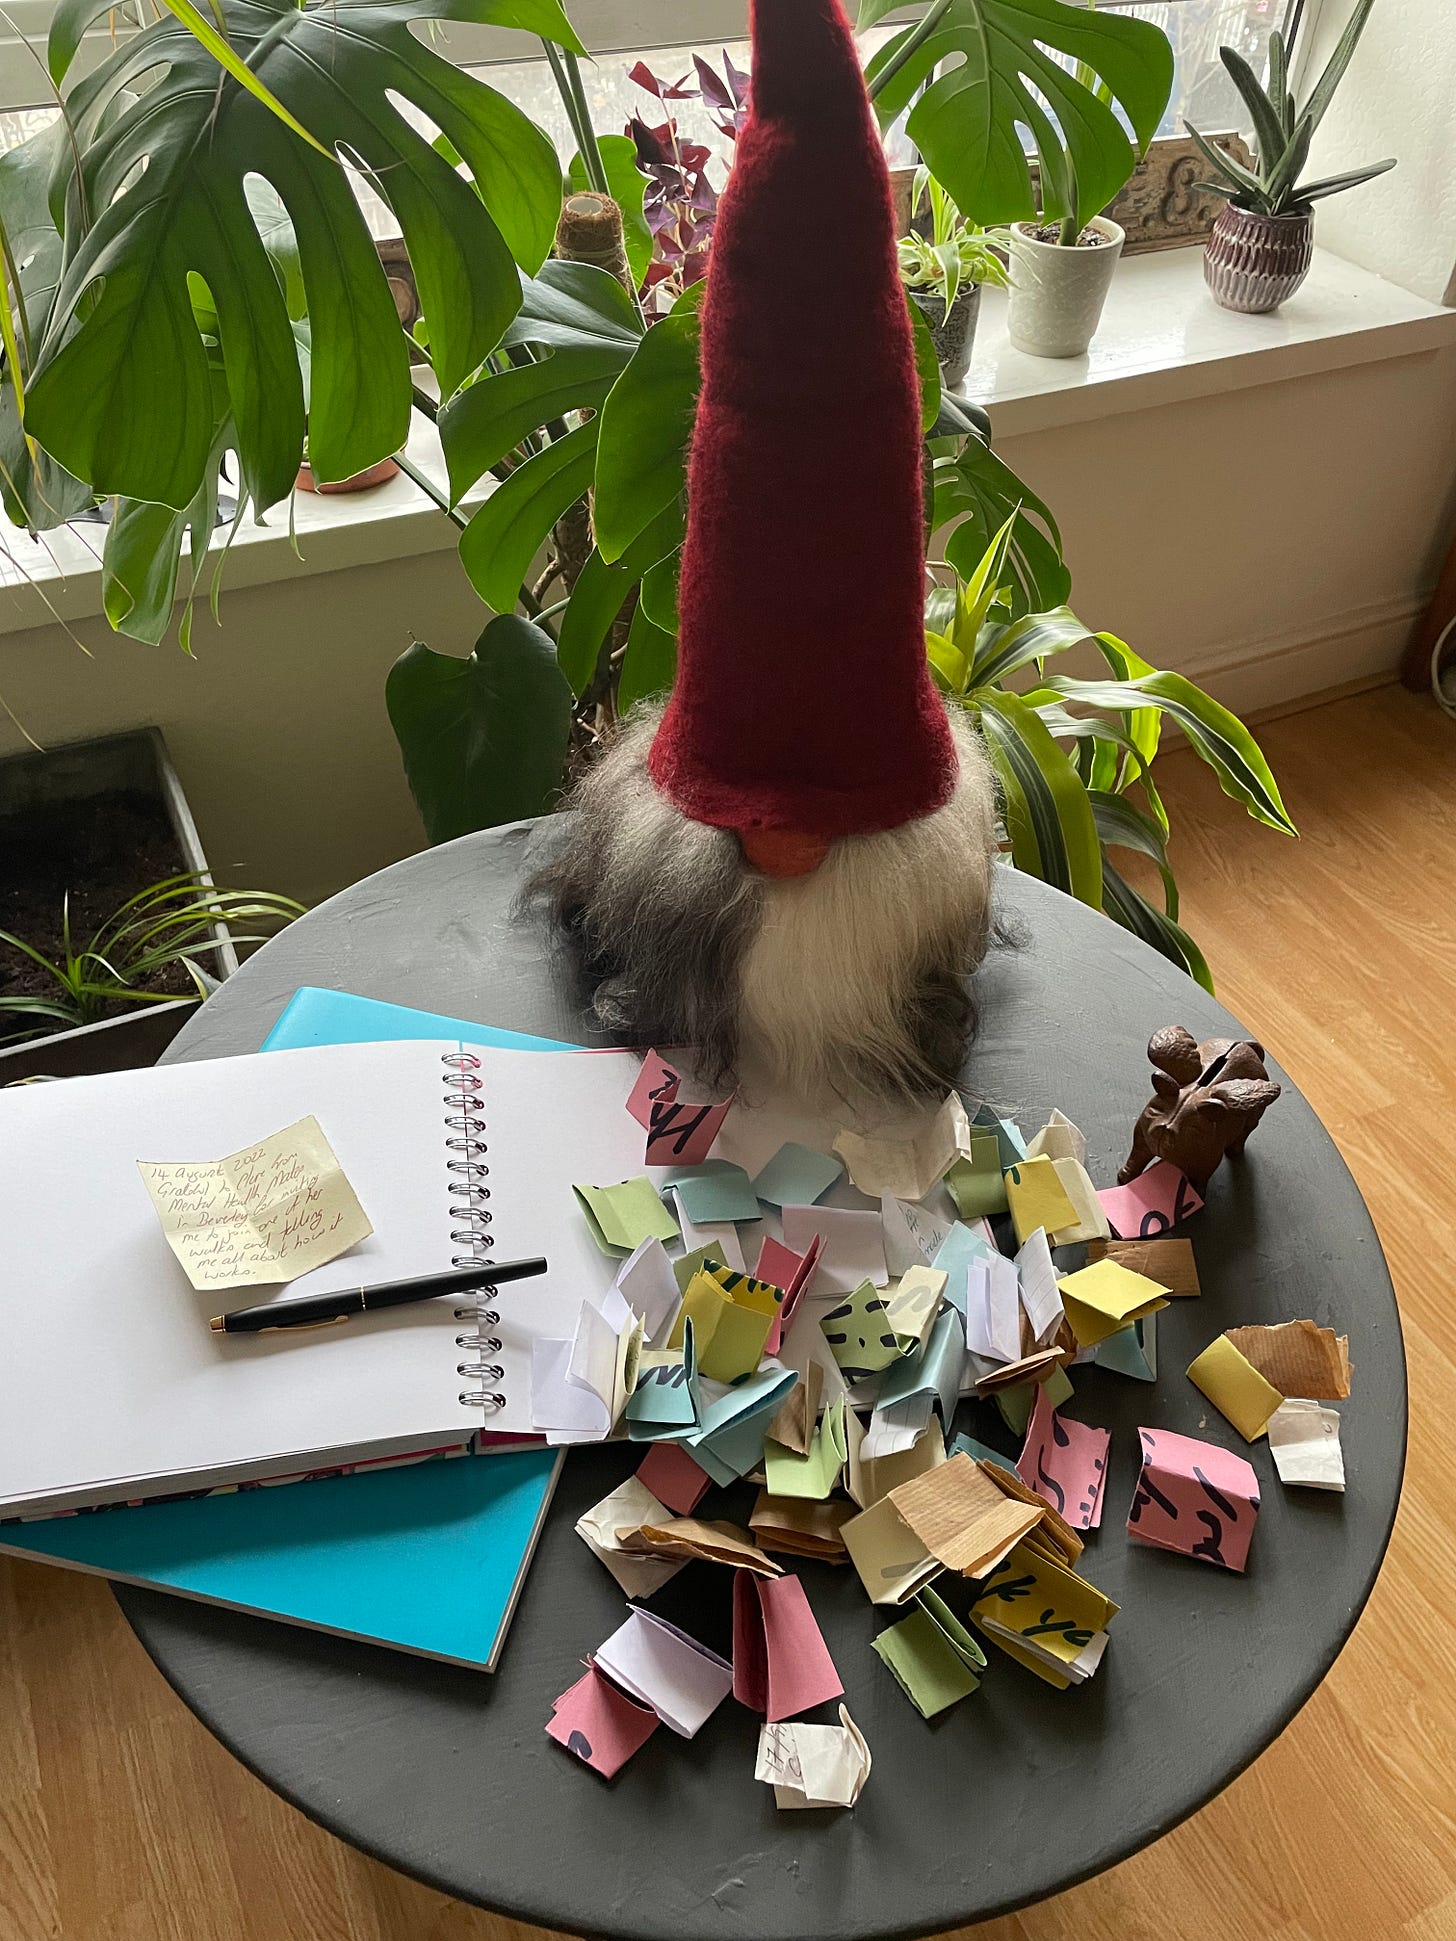 A table covered in folded scraps of coloured paper next to an open scrapbook with a pen. A stuffed Nordic gnome with a red hat is in the background.